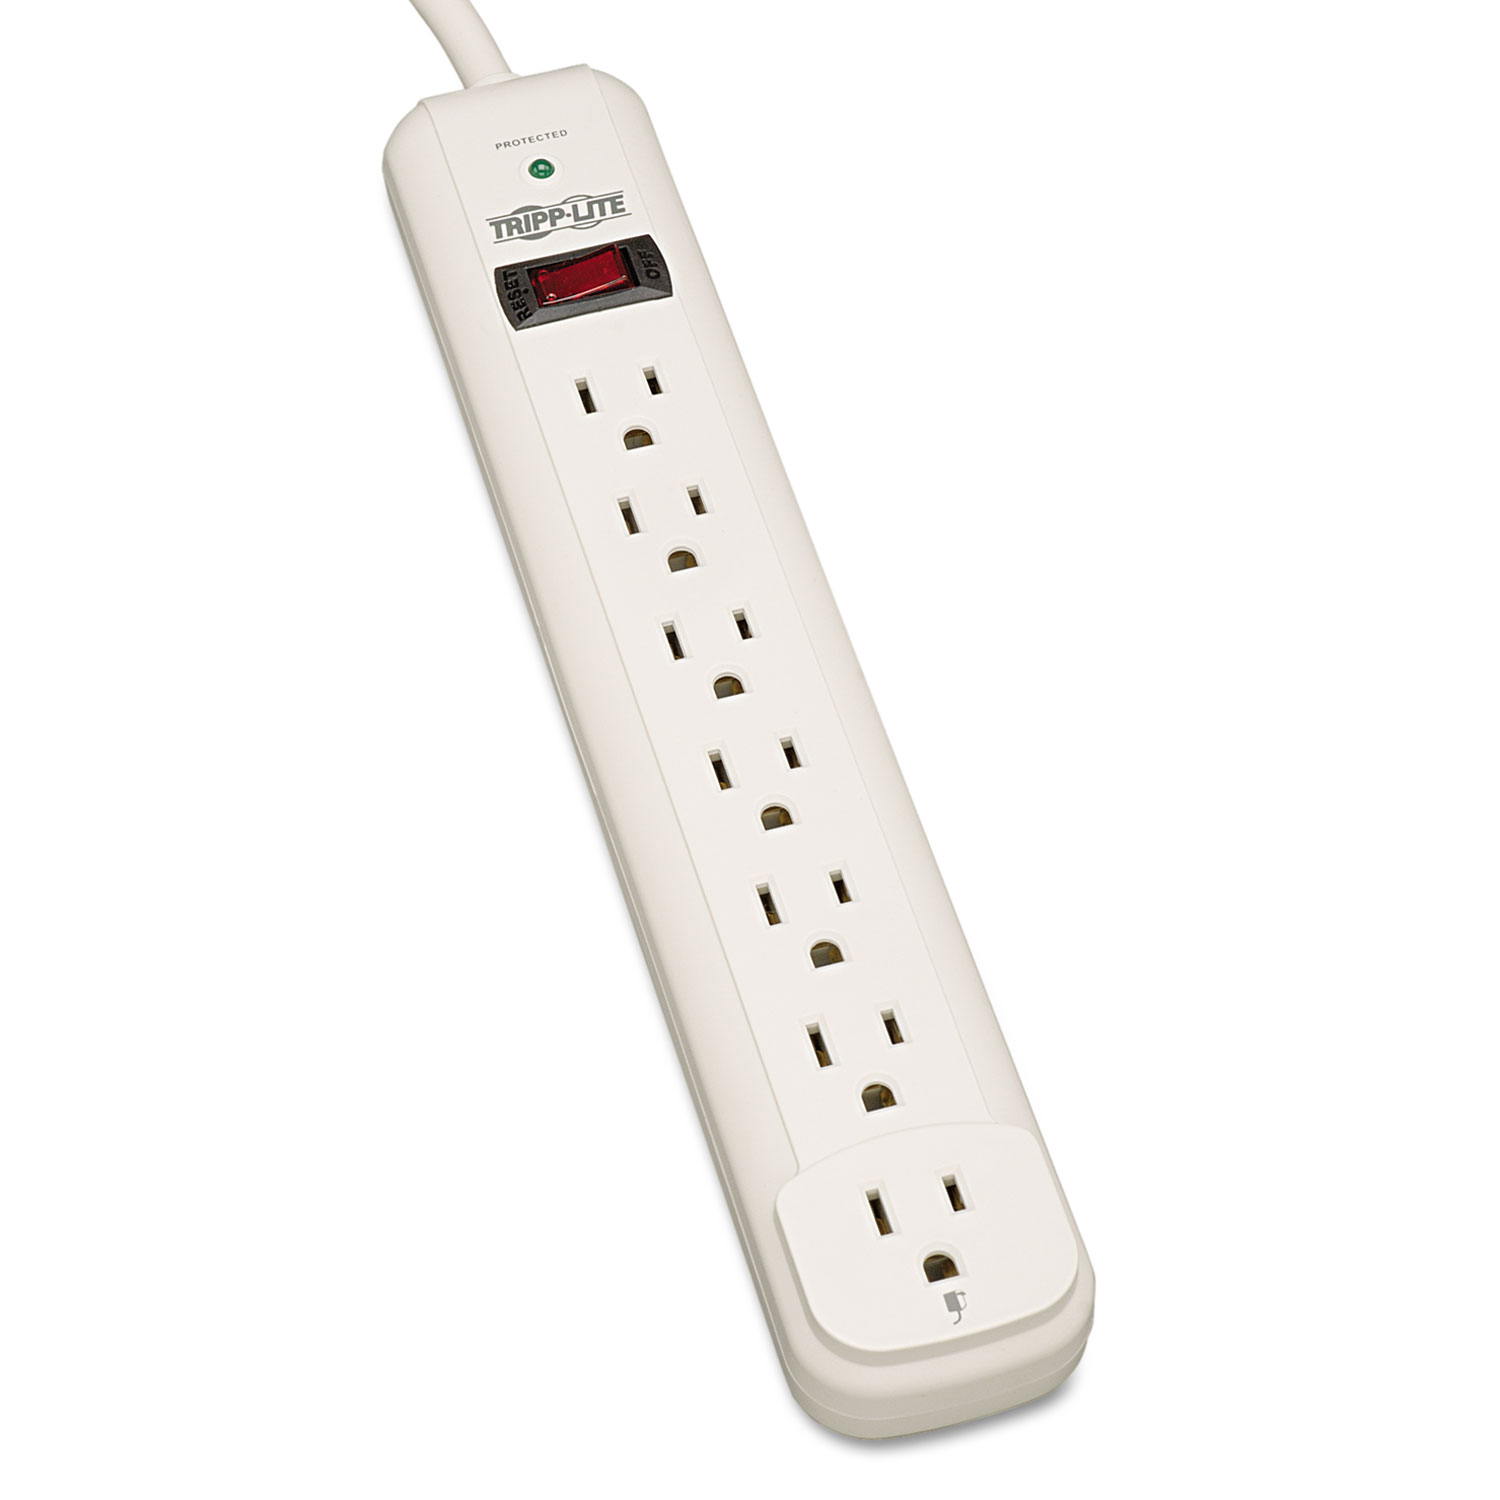  Tripp Lite TLP712 Protect It! Surge Protector, 7 Outlets, 12 ft. Cord, 1080 Joules, Light Gray (TRPTLP712) 